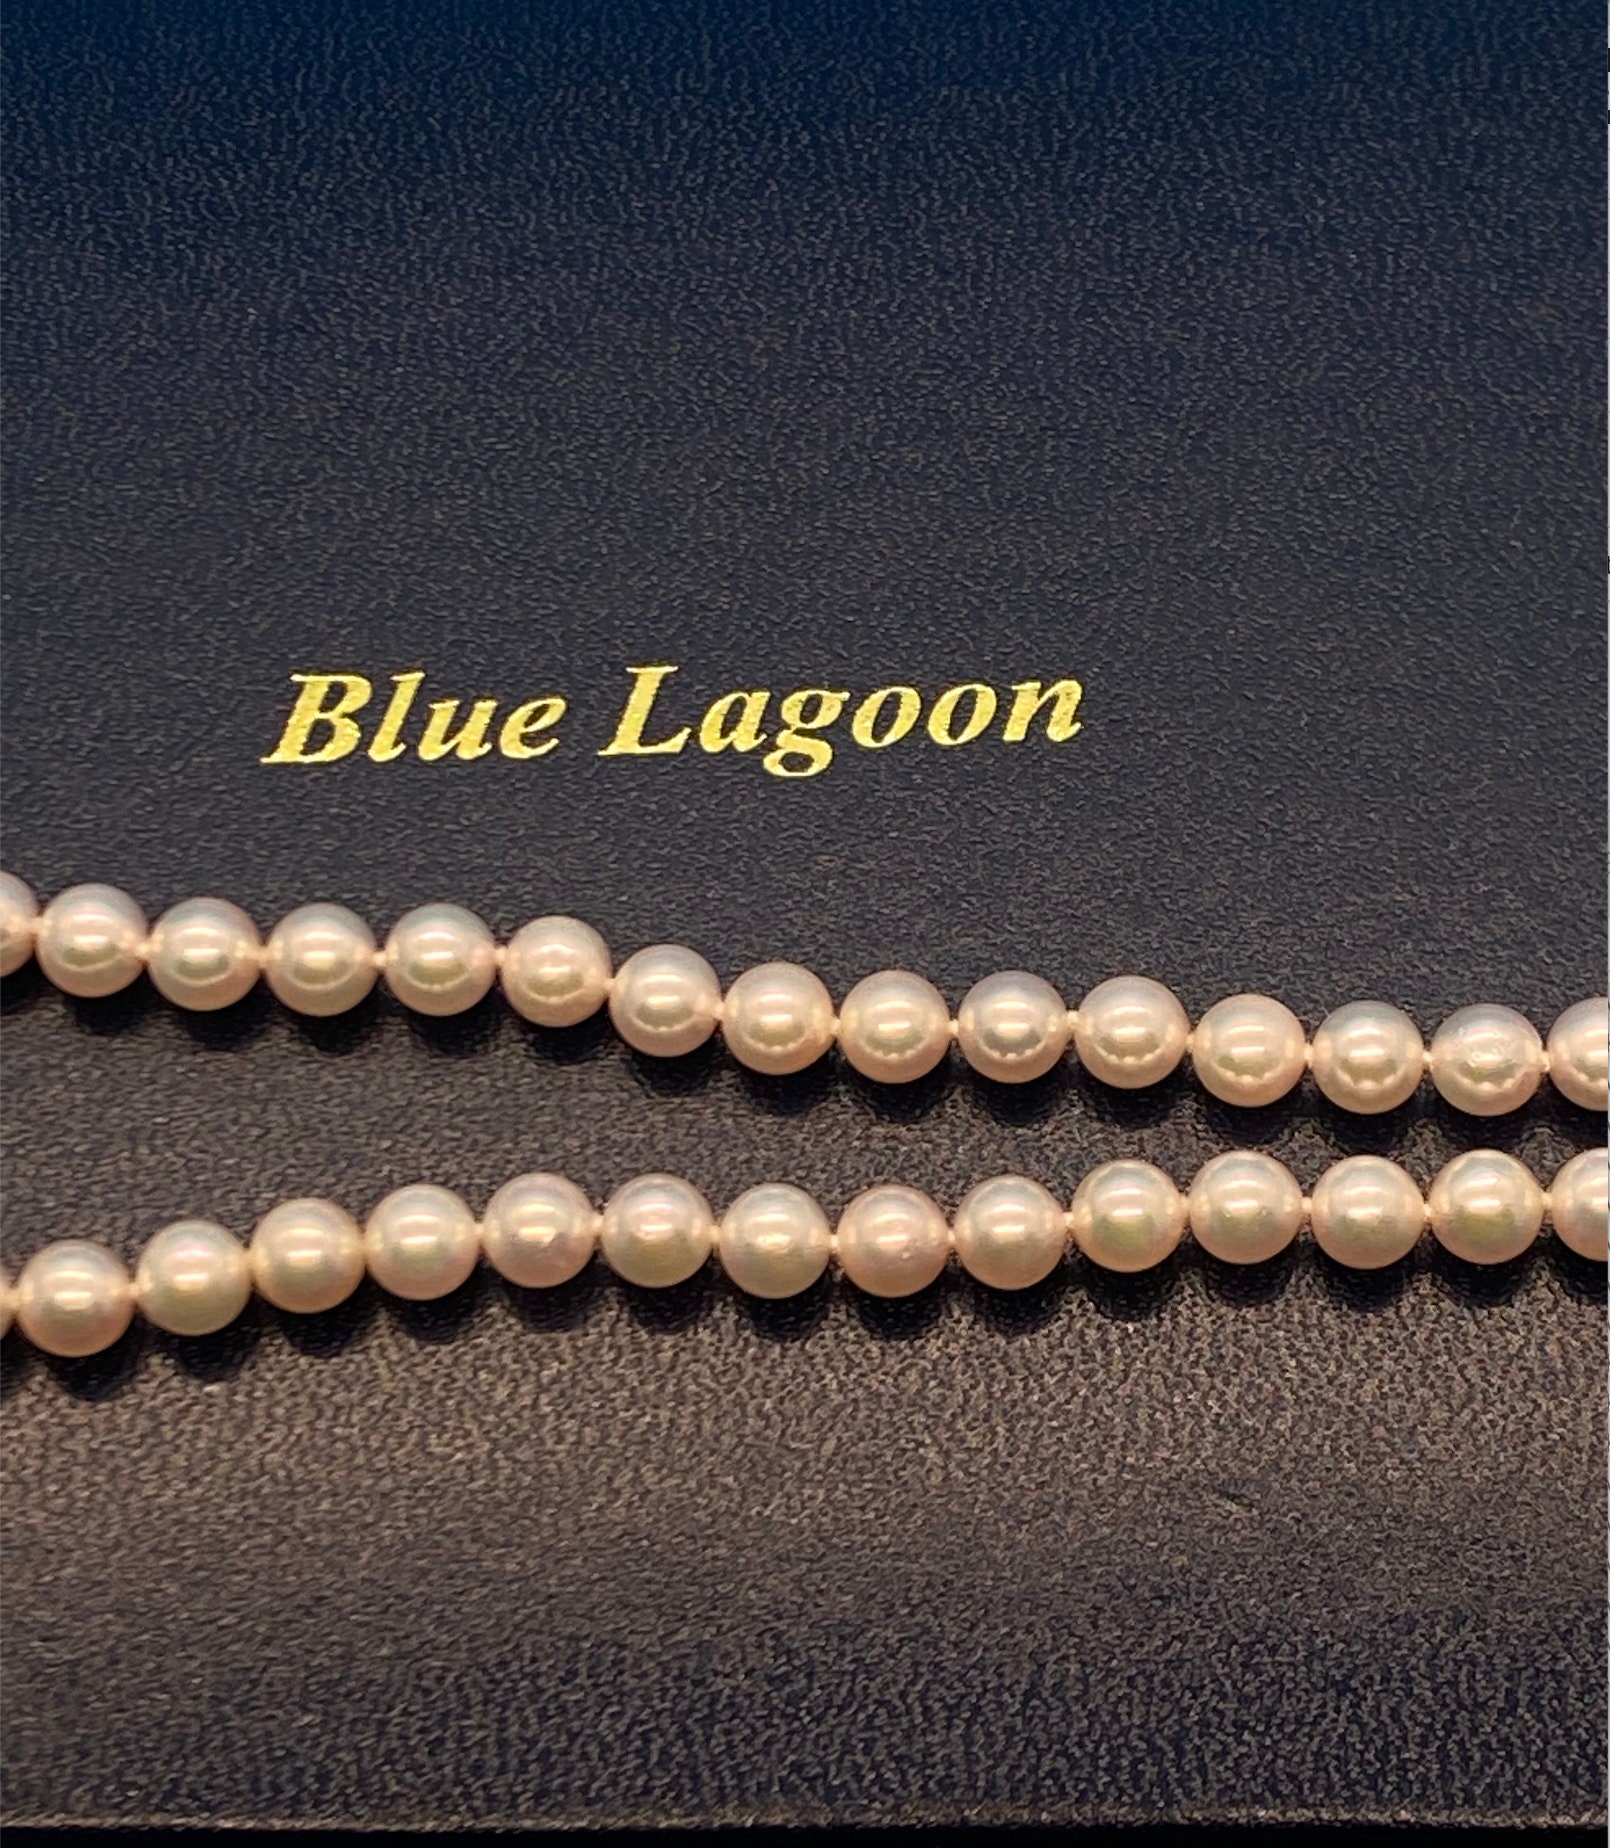 New Blue Lagoon by Mikimoto pearl silver necklace | Silver pearl necklace,  Mikimoto jewelry, Mikimoto pearls